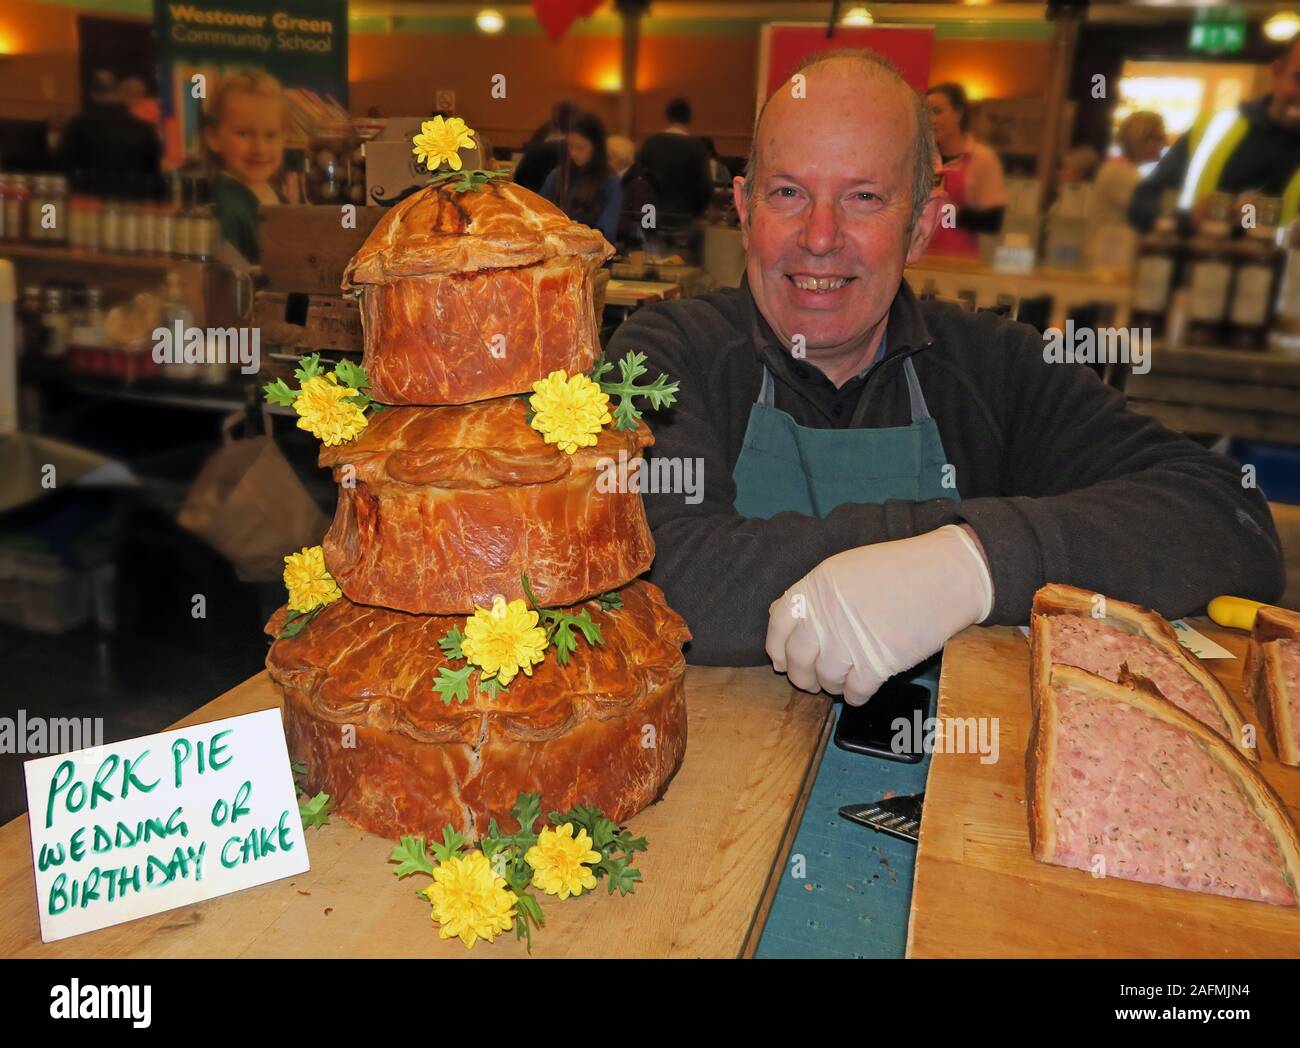 Torta Di Maiale Pluripremiata - Bridgwater Food And Drink Festival, Aprile 2019 - Bridgwater Town, Somerset, South West England, Regno Unito Foto Stock